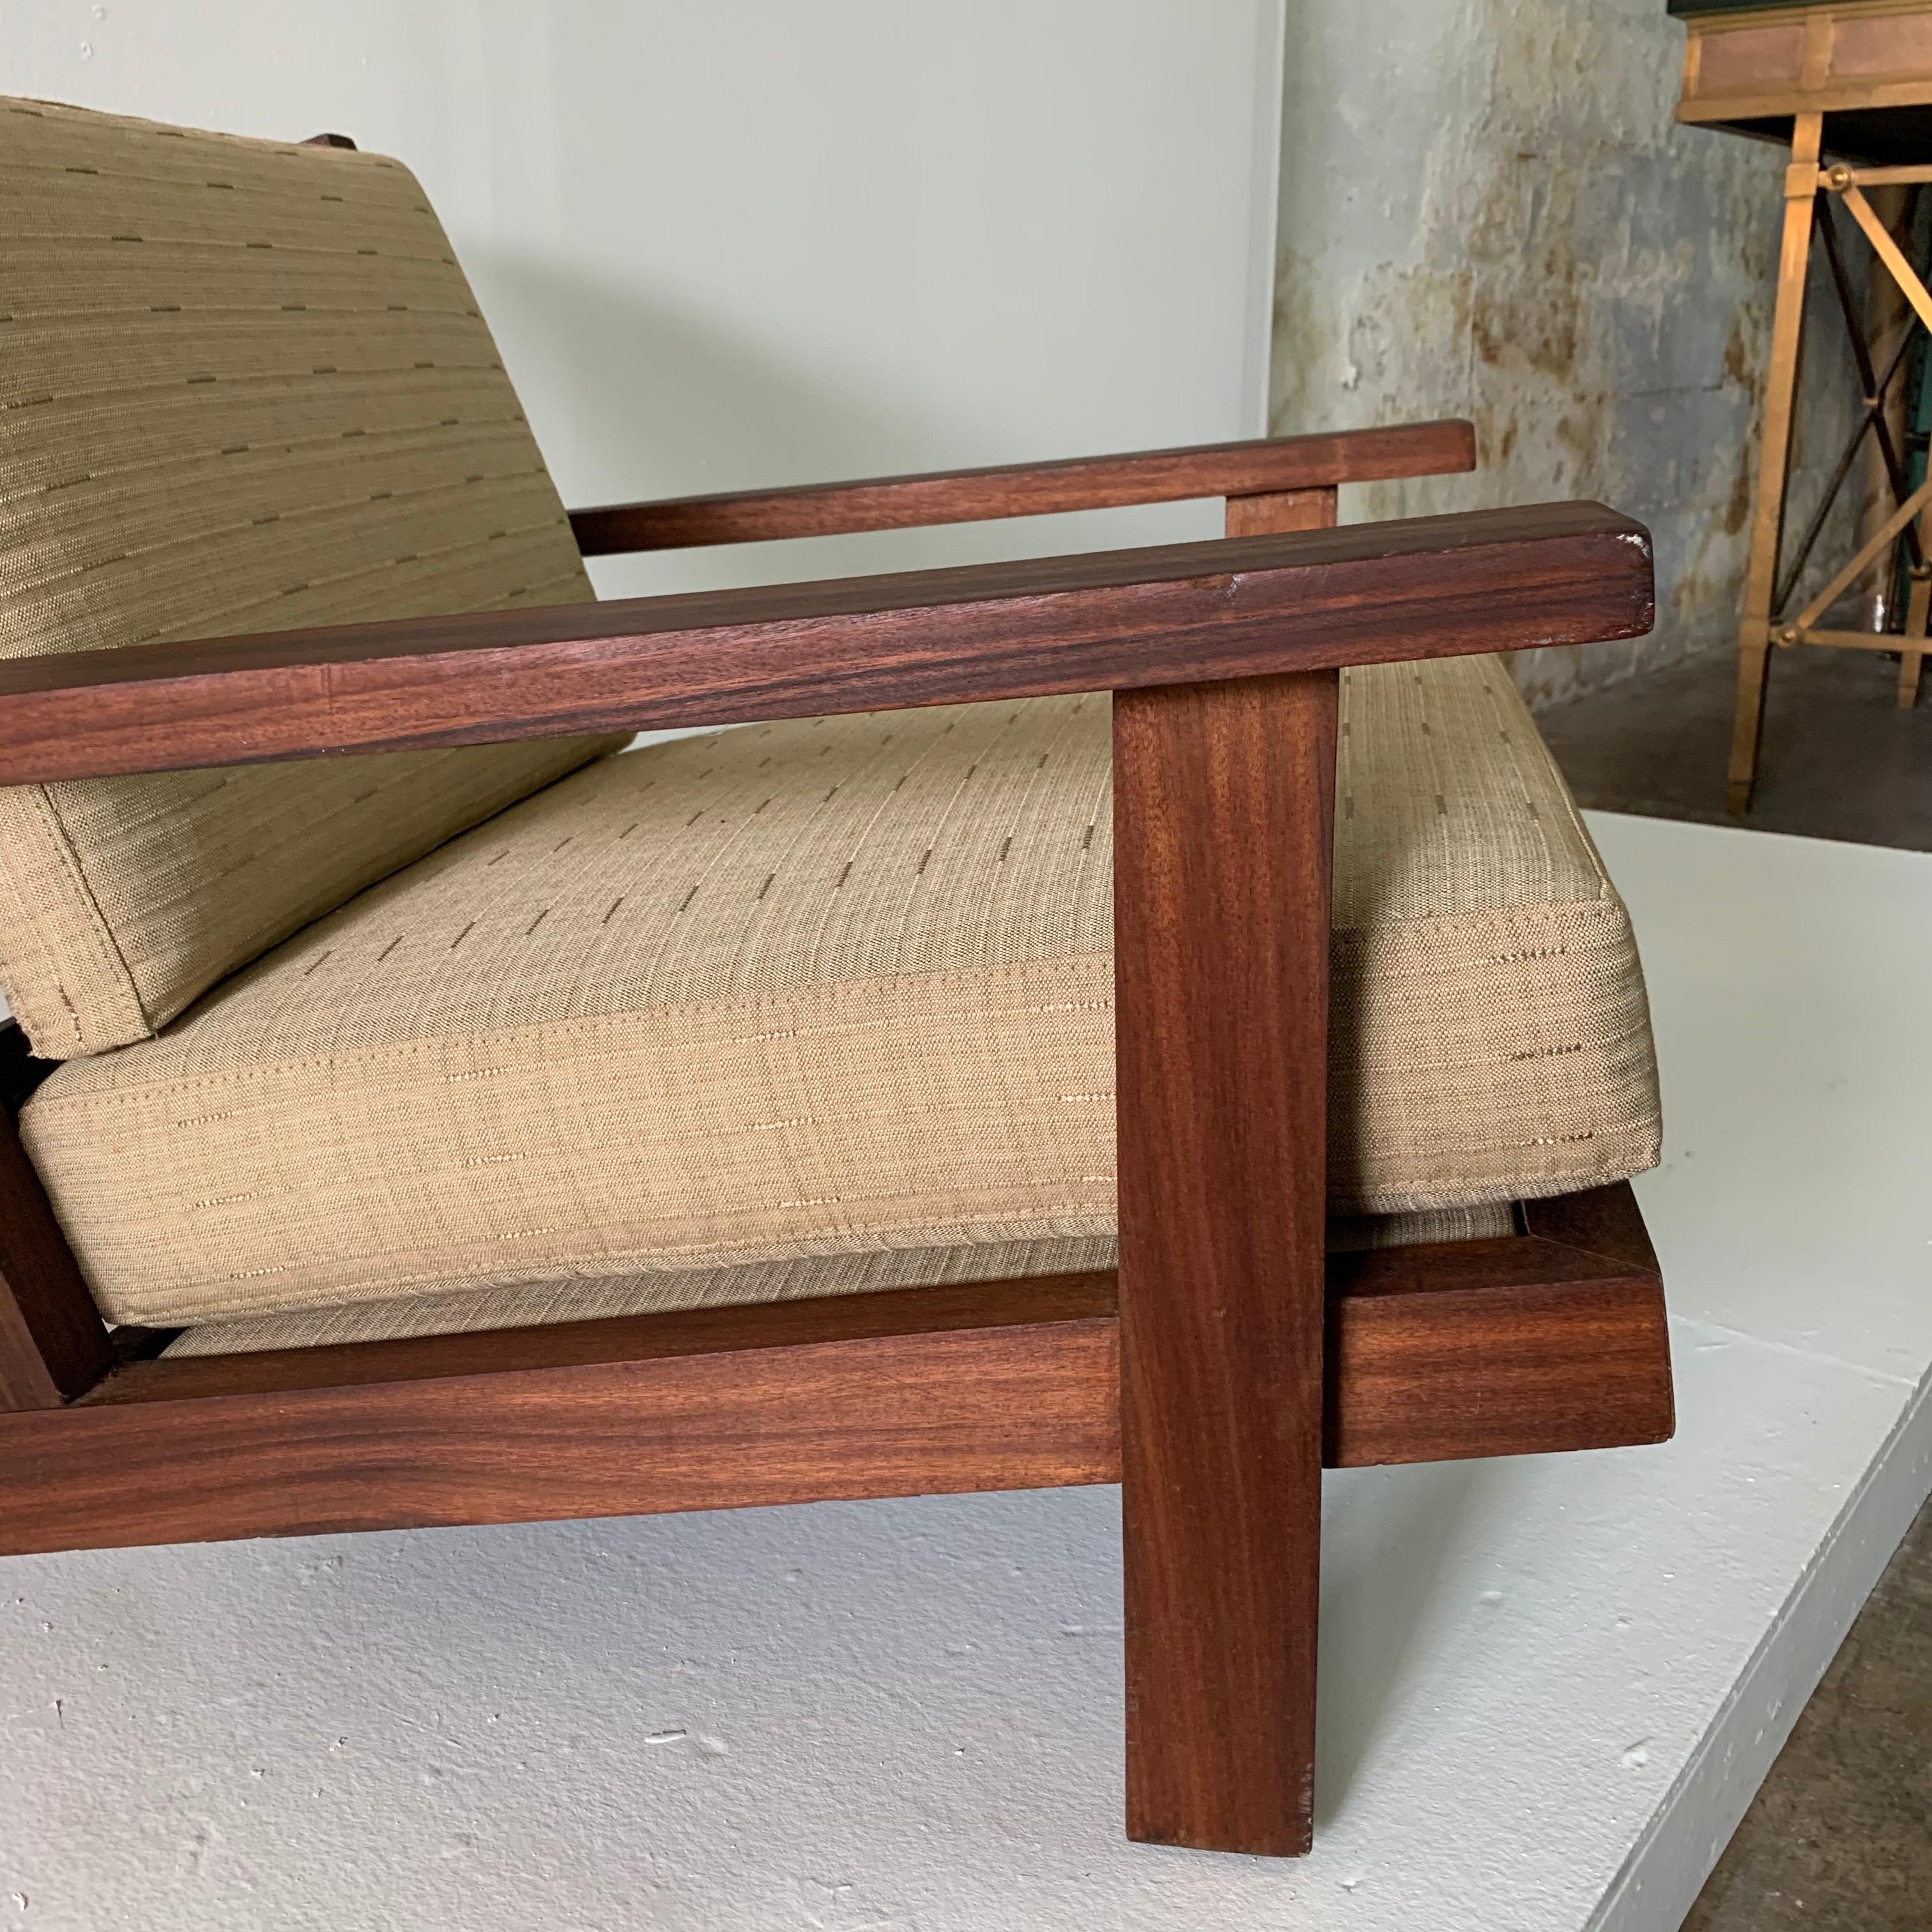 This is a wide, deep and low all teak armchair from France, made in 1960s. Finished with a beach-vibe fabric in neutral tones. This was acquired from the Estate of Amy Perlin, New York. There is a second similar style chair with a higher back